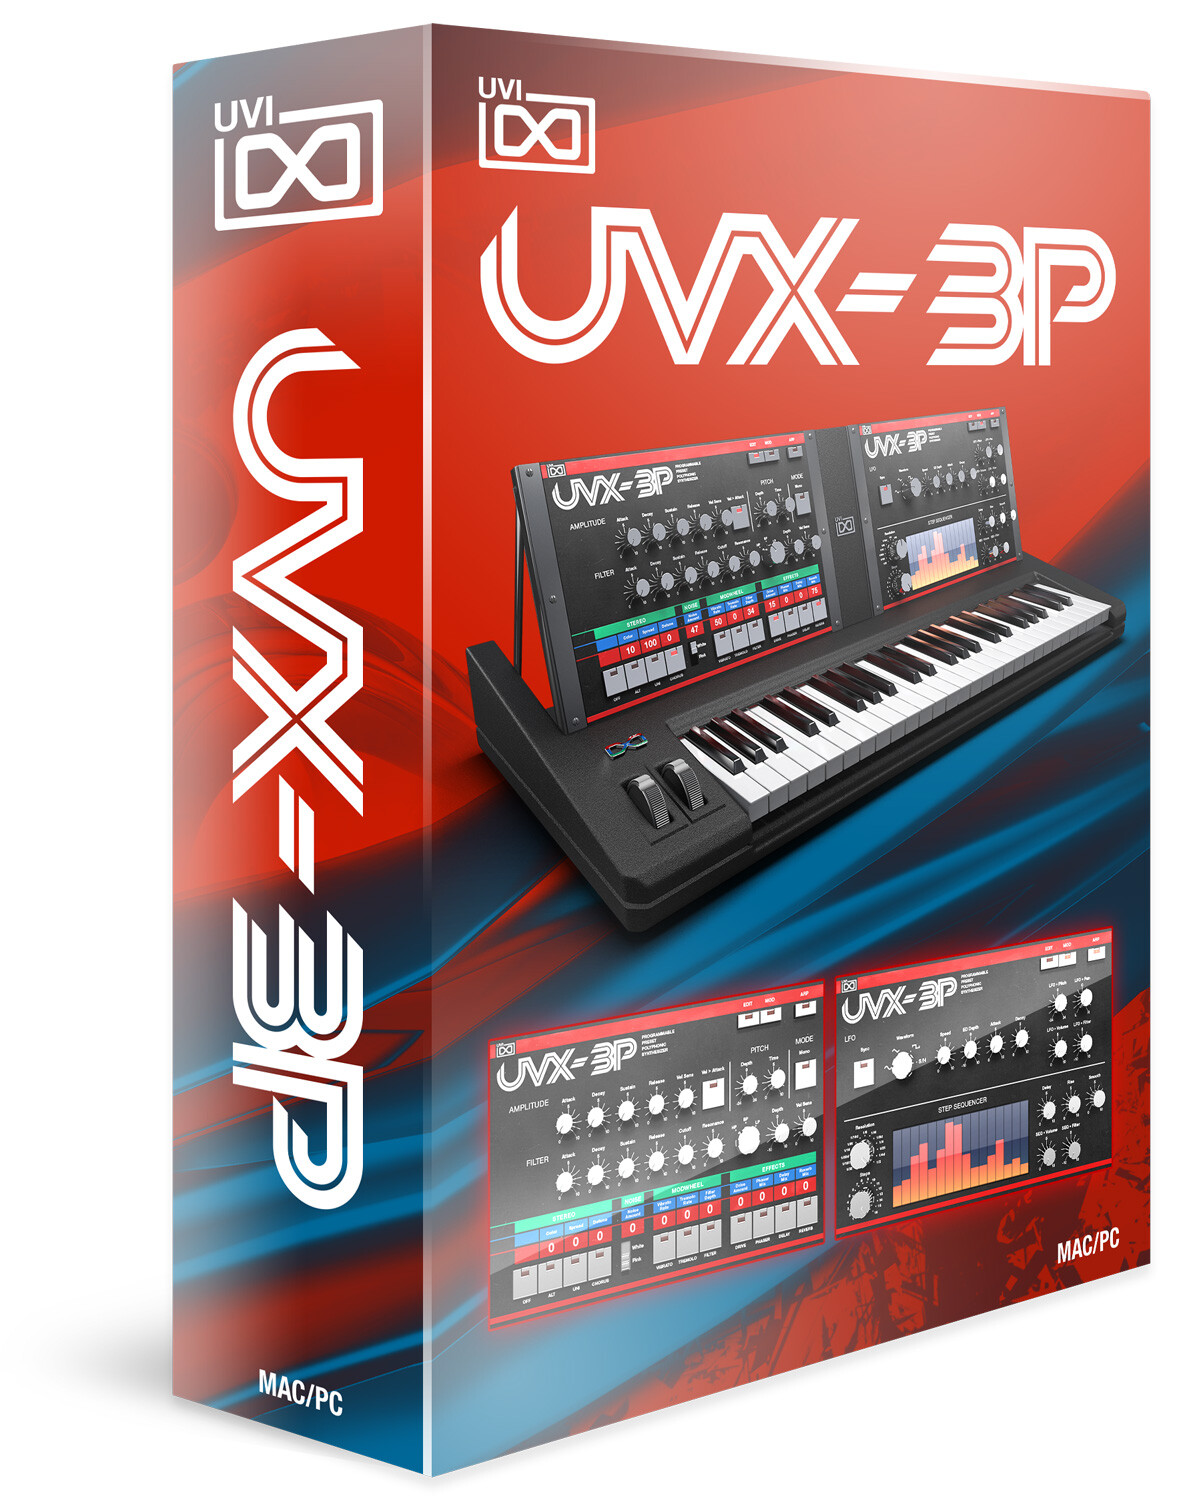 Buy the UVX-10P and get the UVX-3P for free